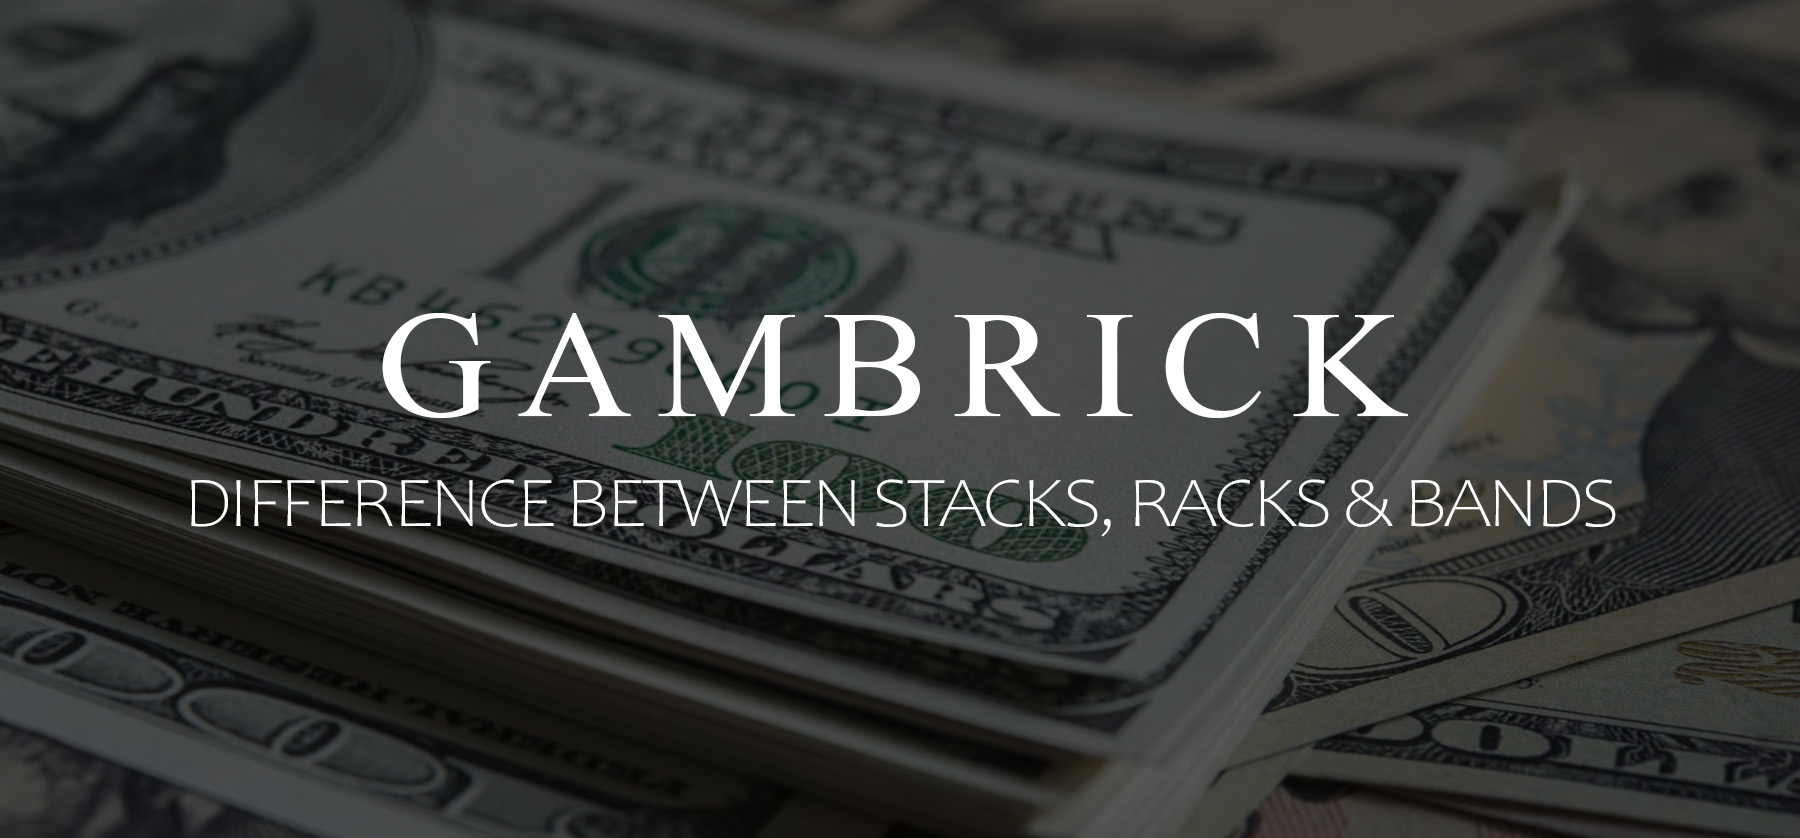 difference between stacks, racks and bands banner 1.0